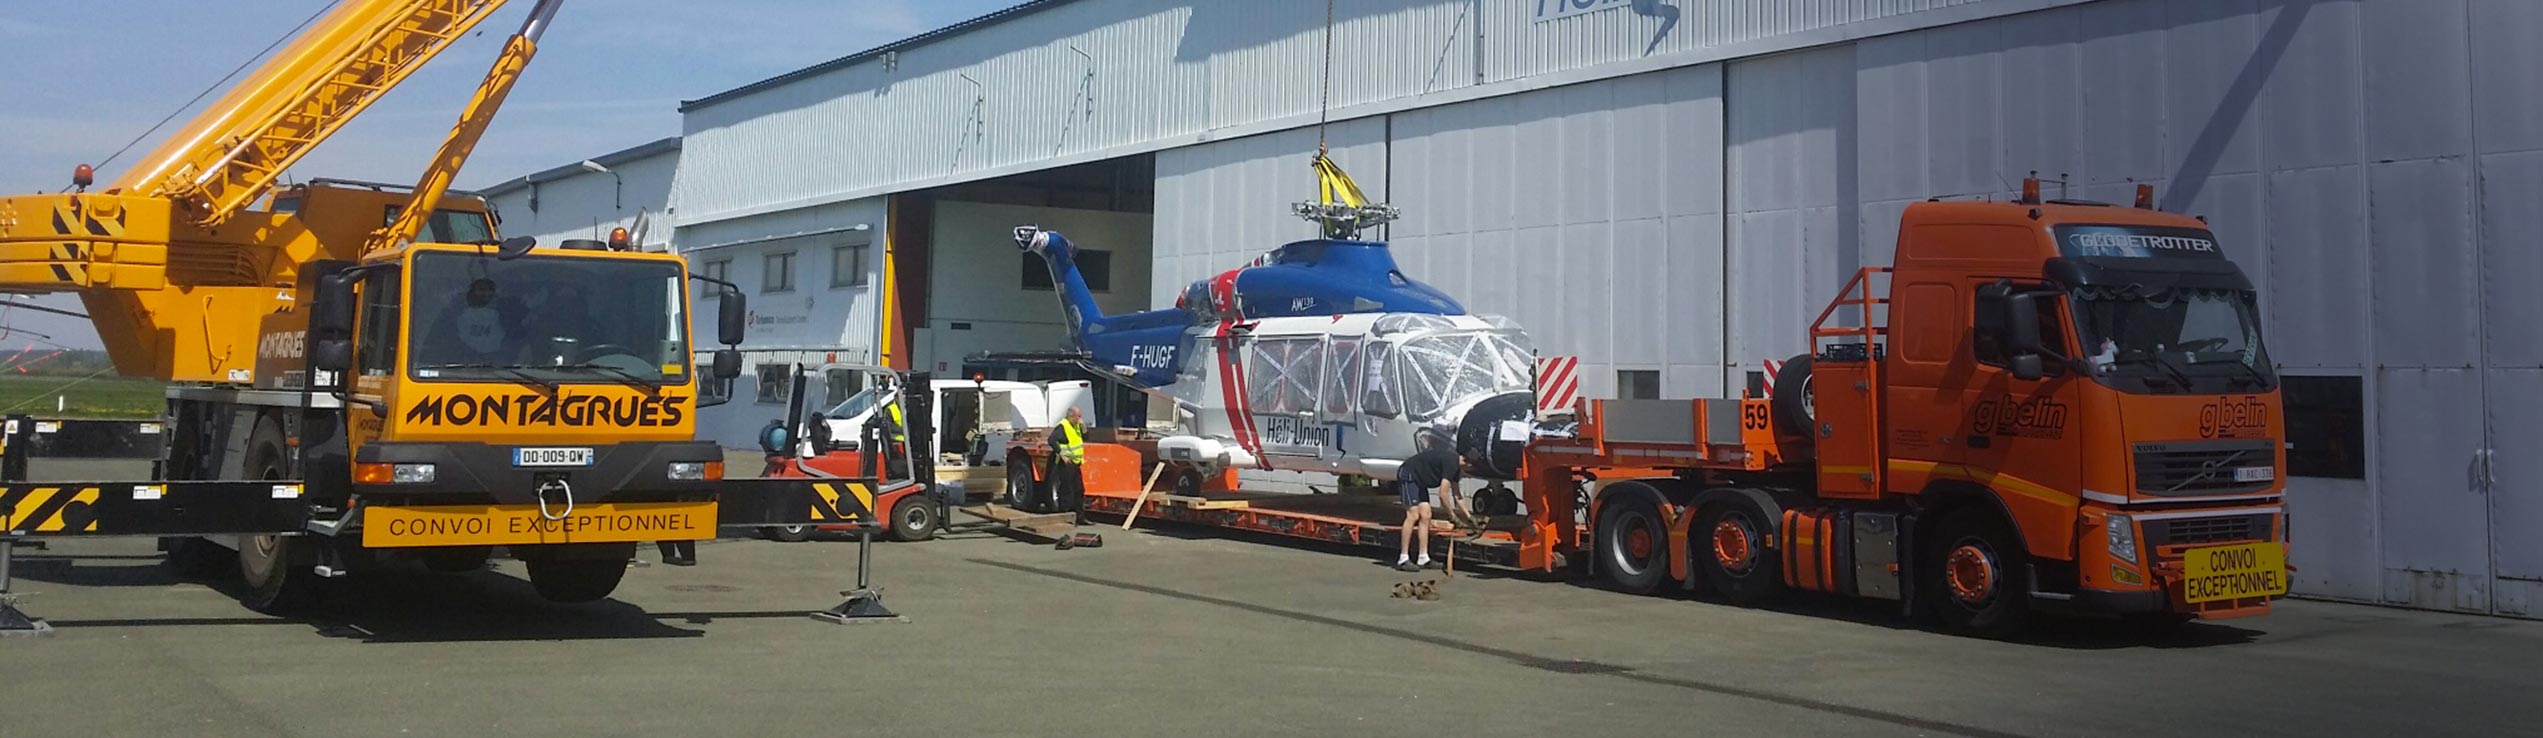 offshore helicopter transport